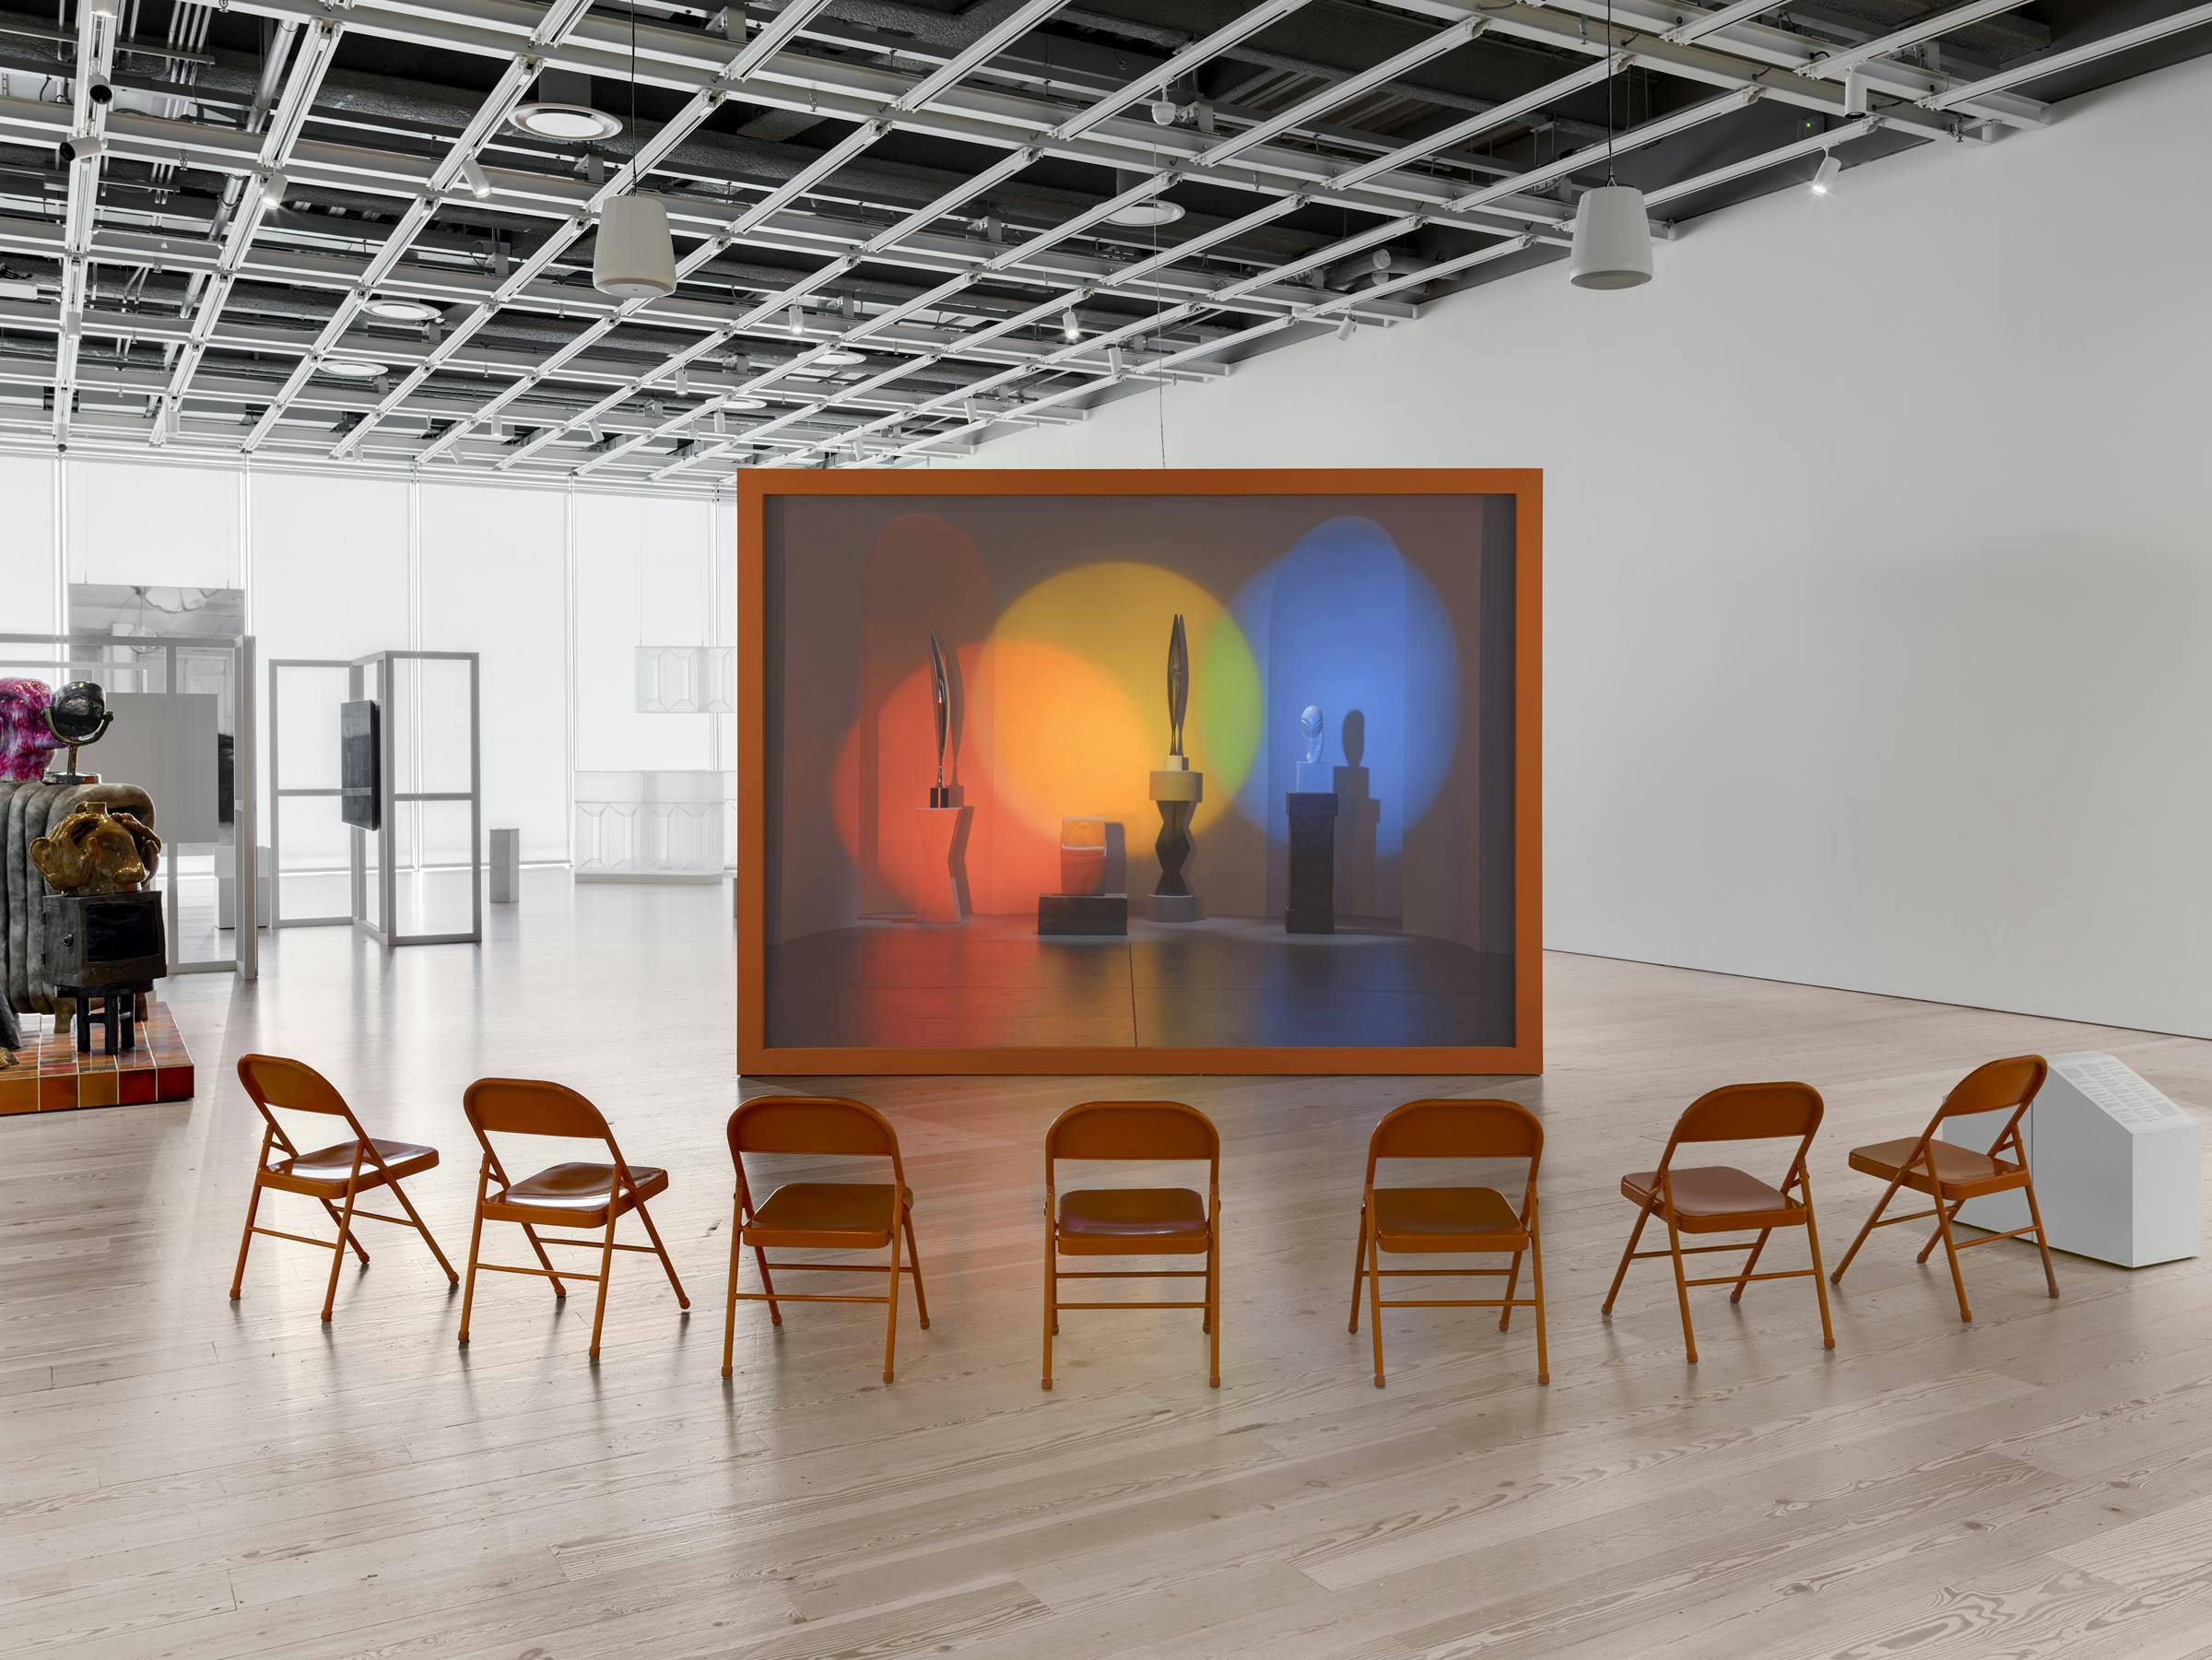 an art gallery with wooden floors and white walls. A video art work projected on to an orange freestanding box. 8 orange chairs are in front of the projection for the audience to sit on. 